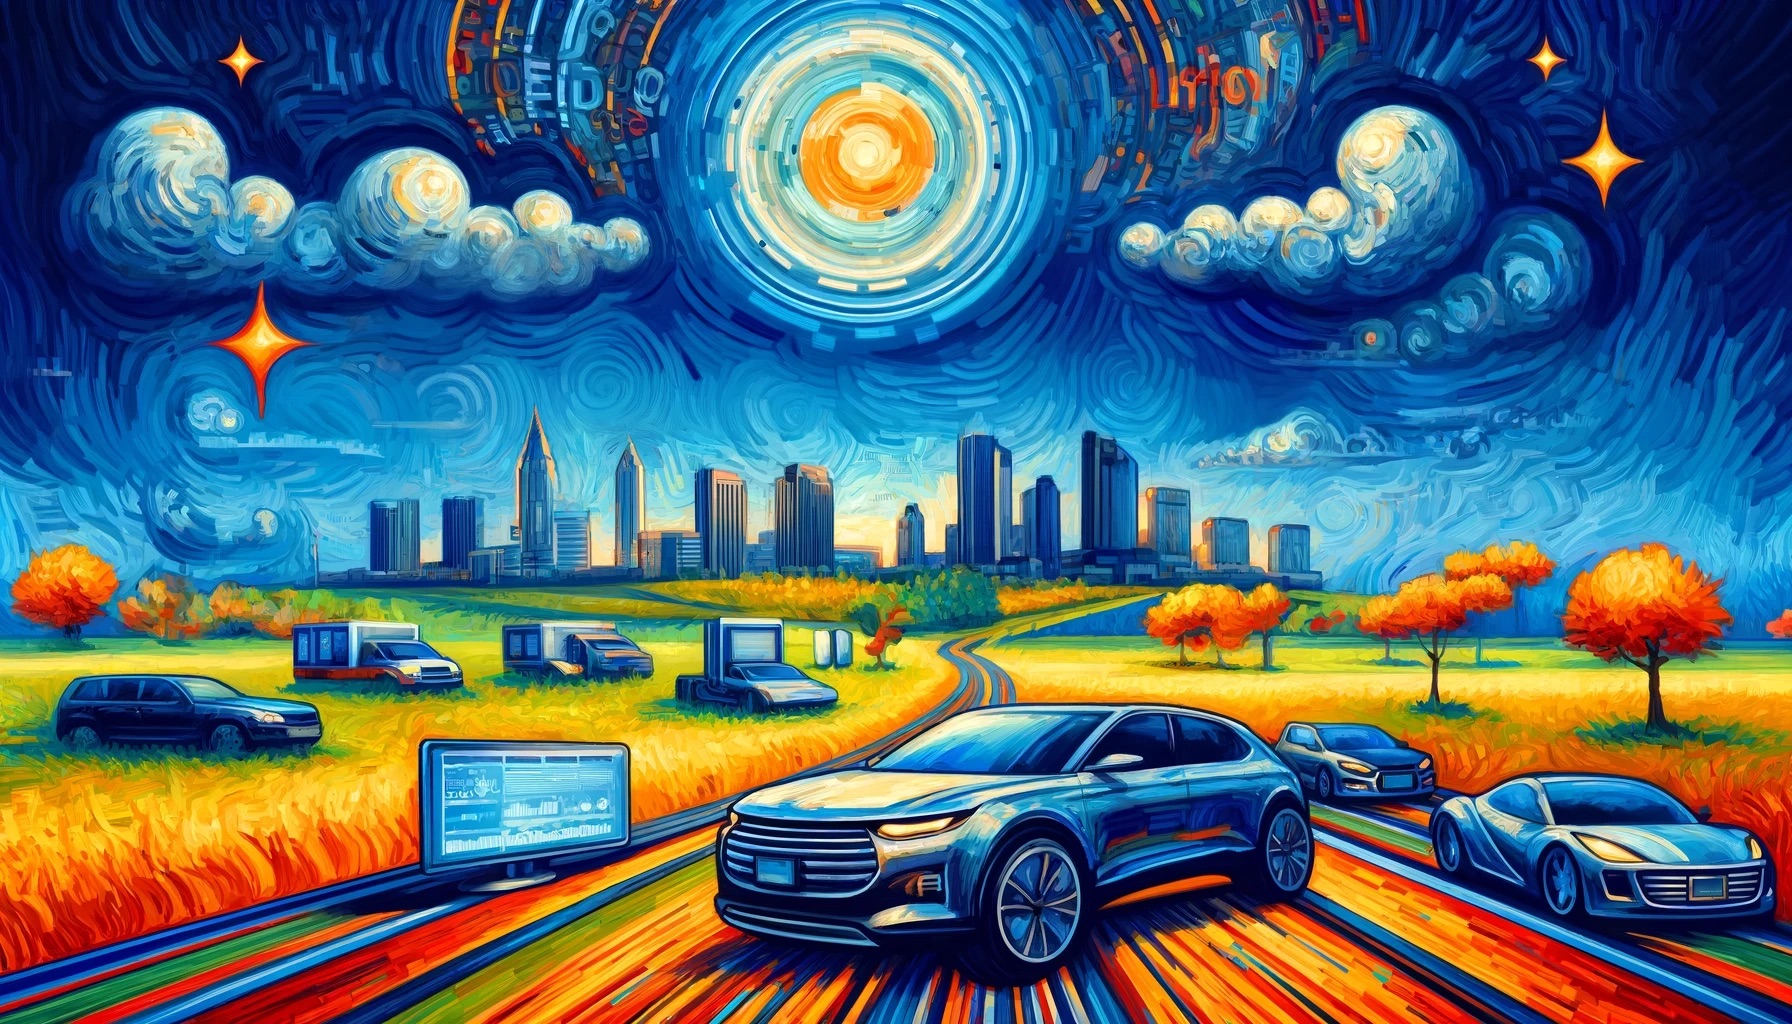 An artistic depiction inspired by Ohio and the concept of electronic titling for modern dealerships in the style of Vincent Van Gogh. The image features rolling landscapes, lush greenery, and a serene countryside with a river winding through. A dealership with cars and digital interfaces is also present, symbolizing streamlined operations and enhanced customer satisfaction. The scene is painted with vibrant, dynamic brush strokes and bold colors, capturing the essence of Ohio's natural beauty and modern automotive services.